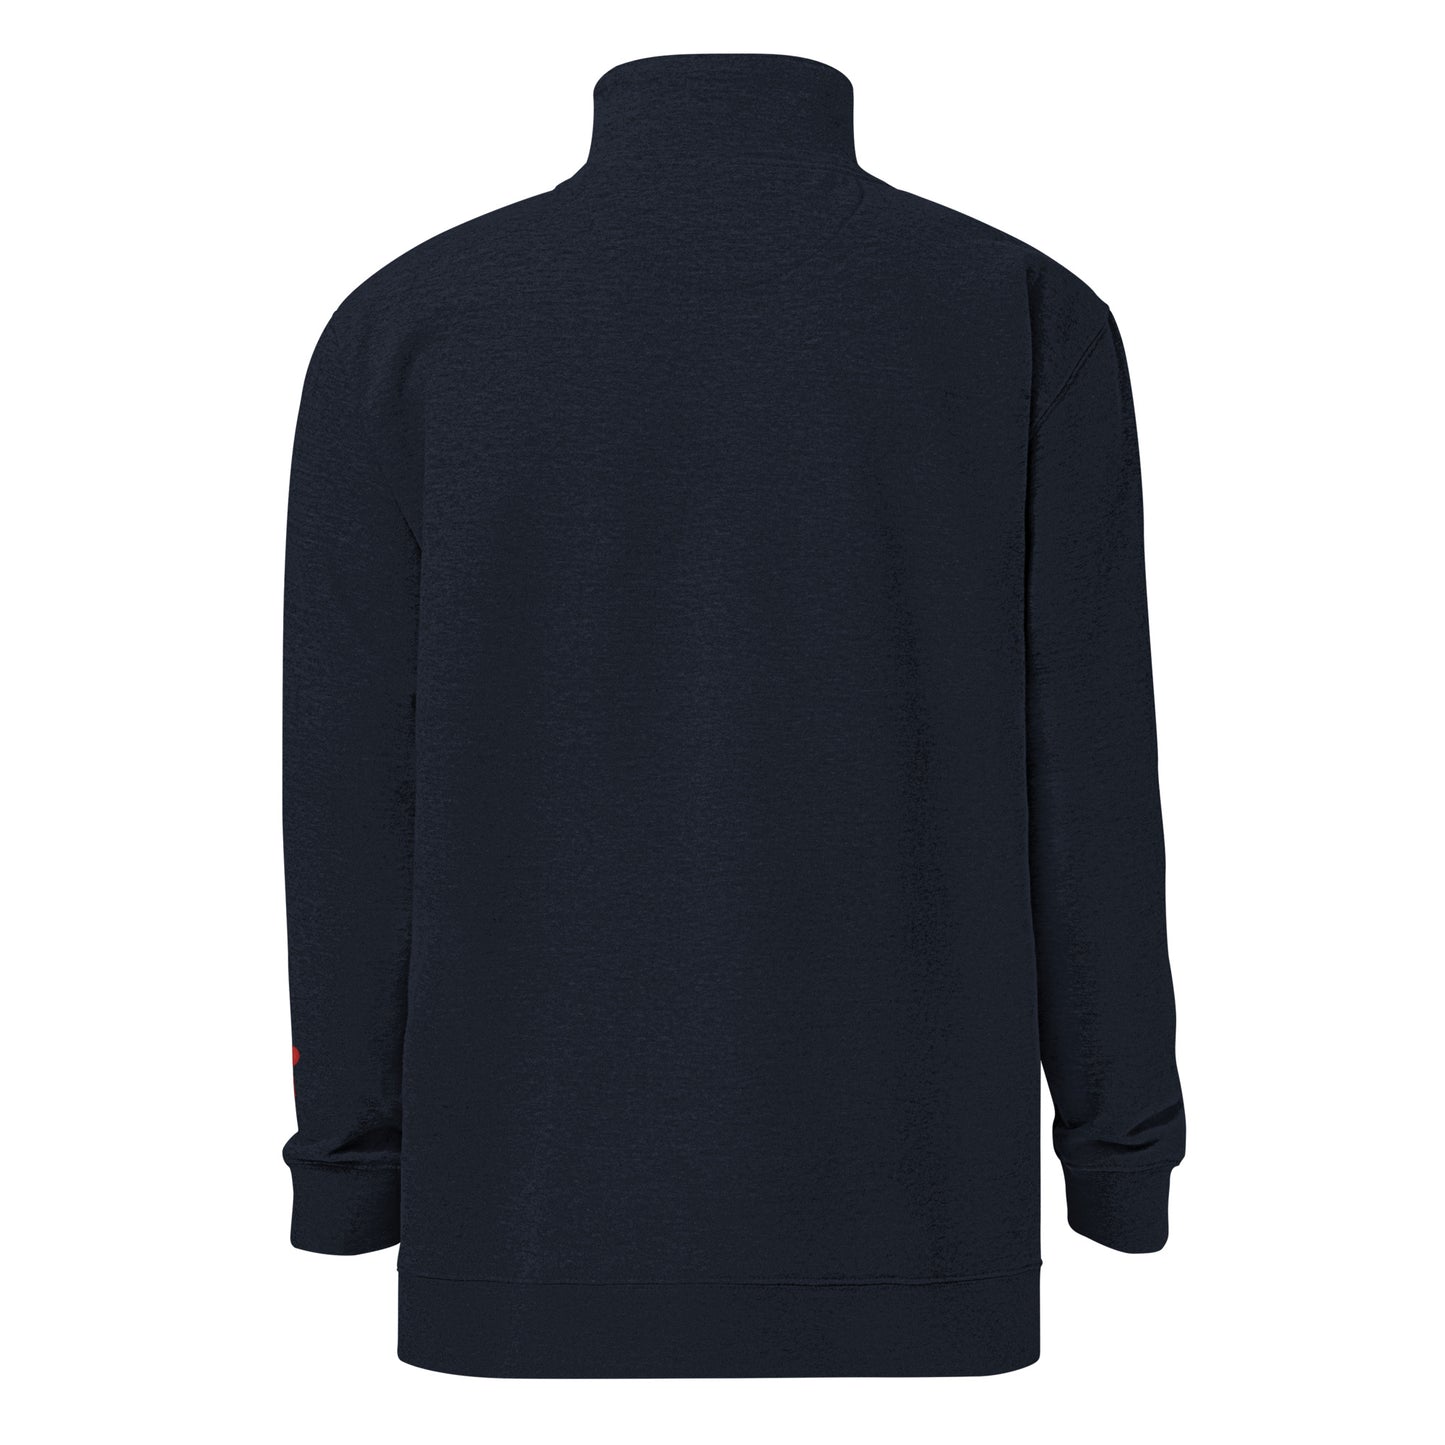 Chinese quince Unisex fleece pullover